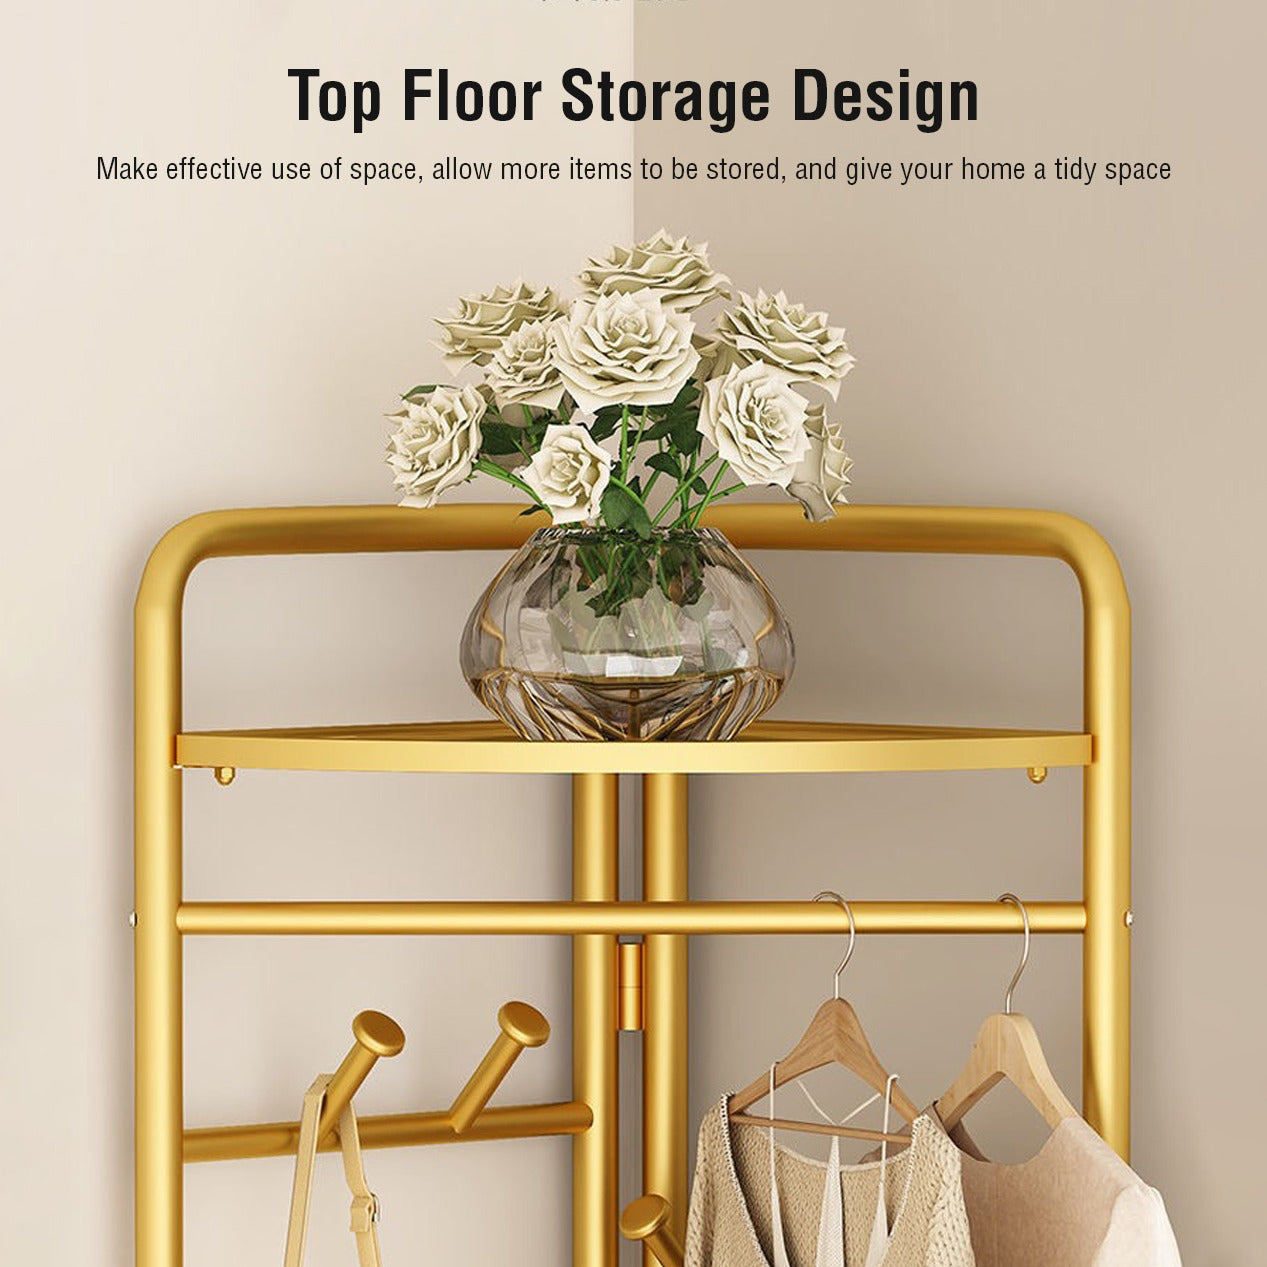 Its a poster where its written- Top floor storage design. make effective use of space, allow more items to be stored, and give your home a tidy space.